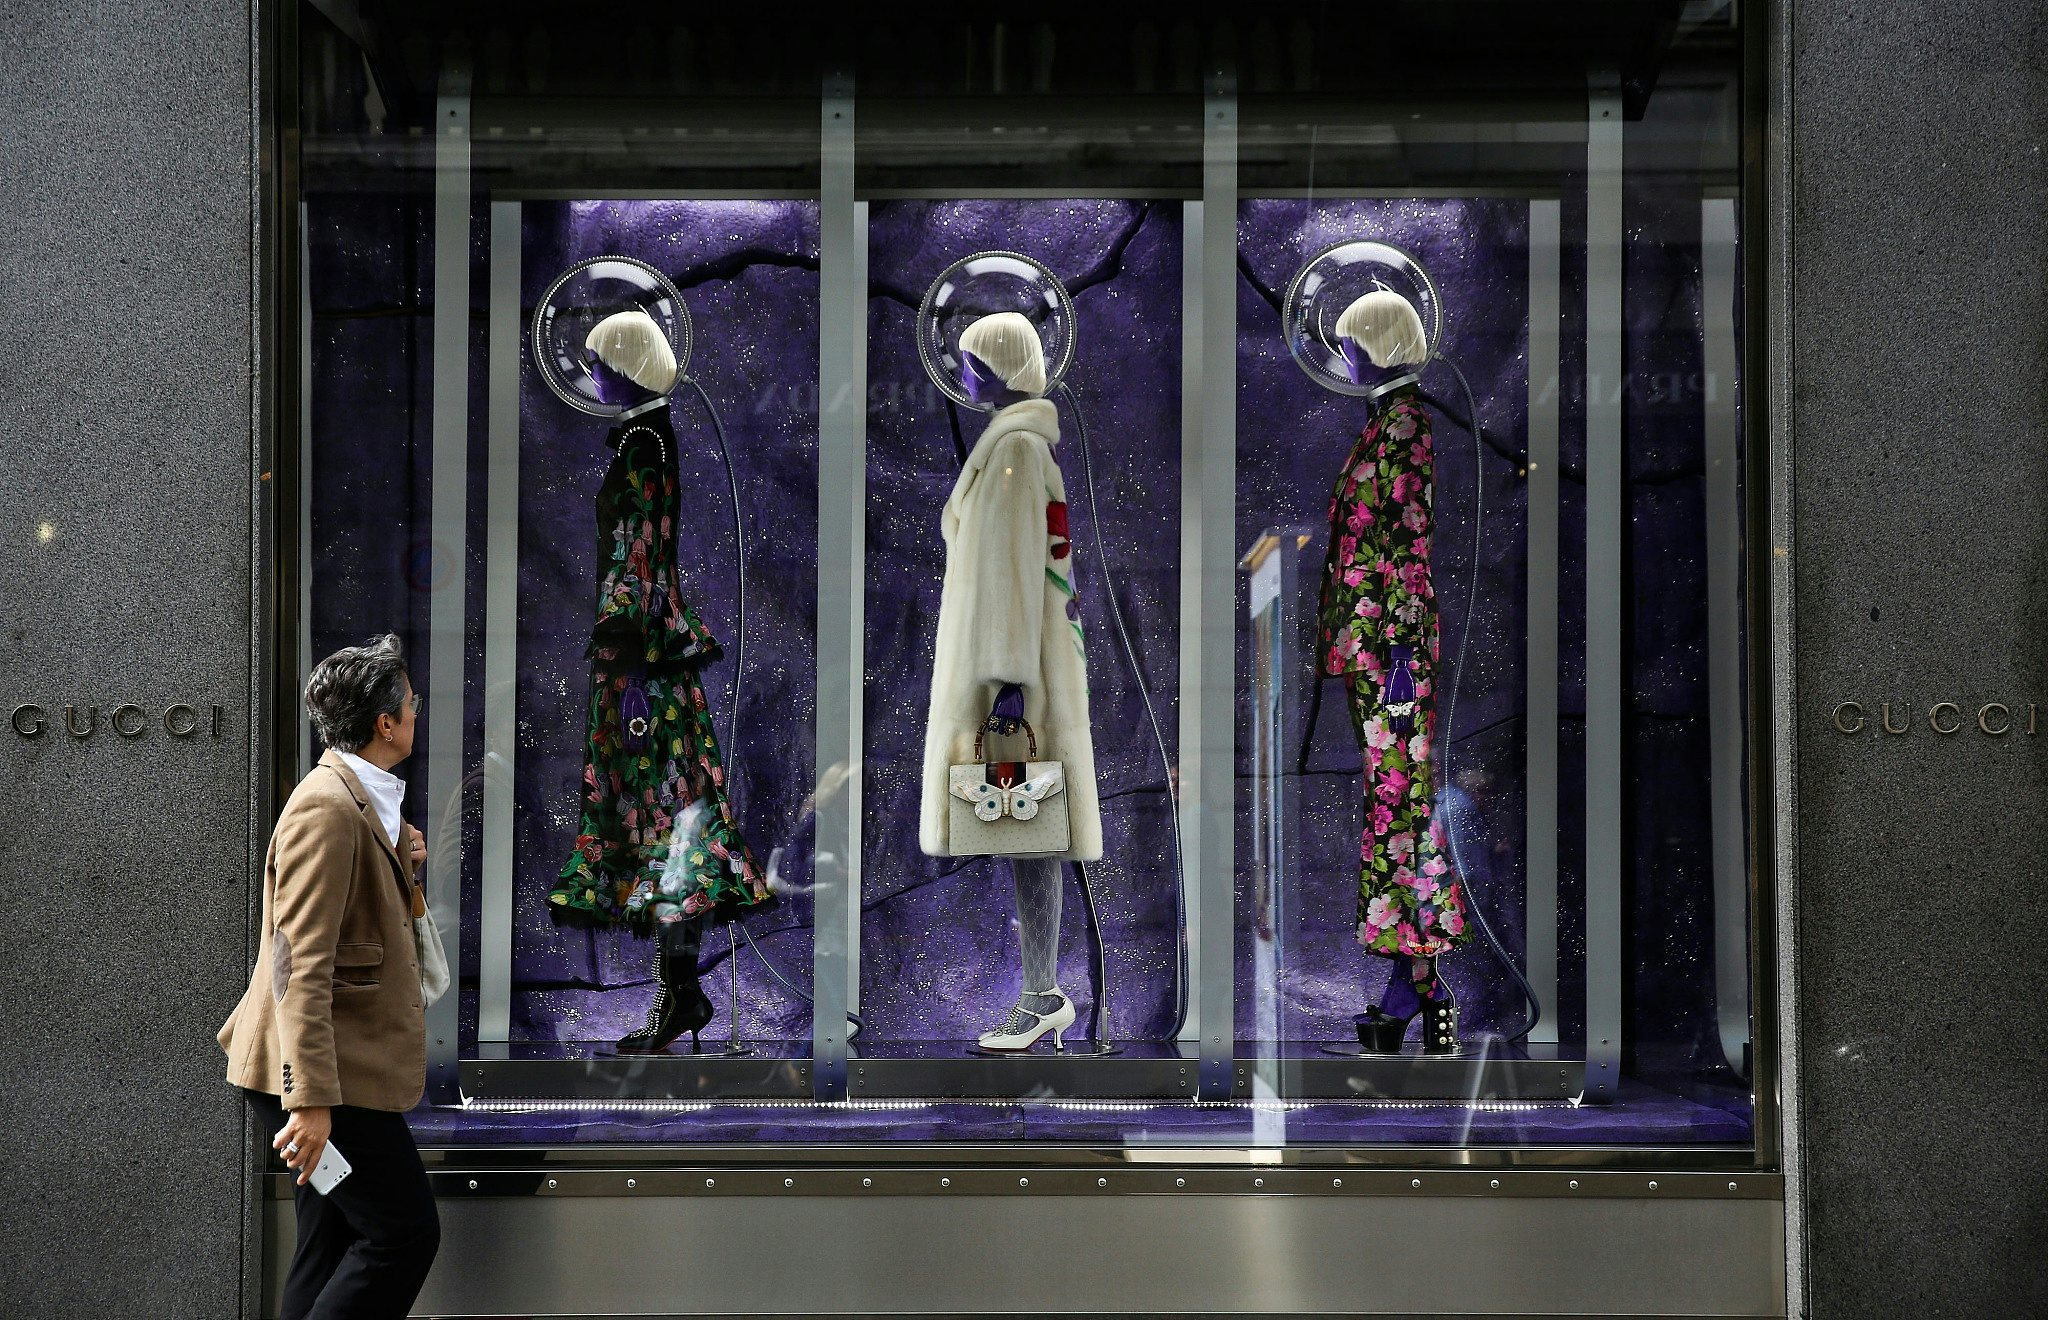 Social media influence of Italian luxury brands like Gucci in China is still a fraction of that in the West. Photo: VCG